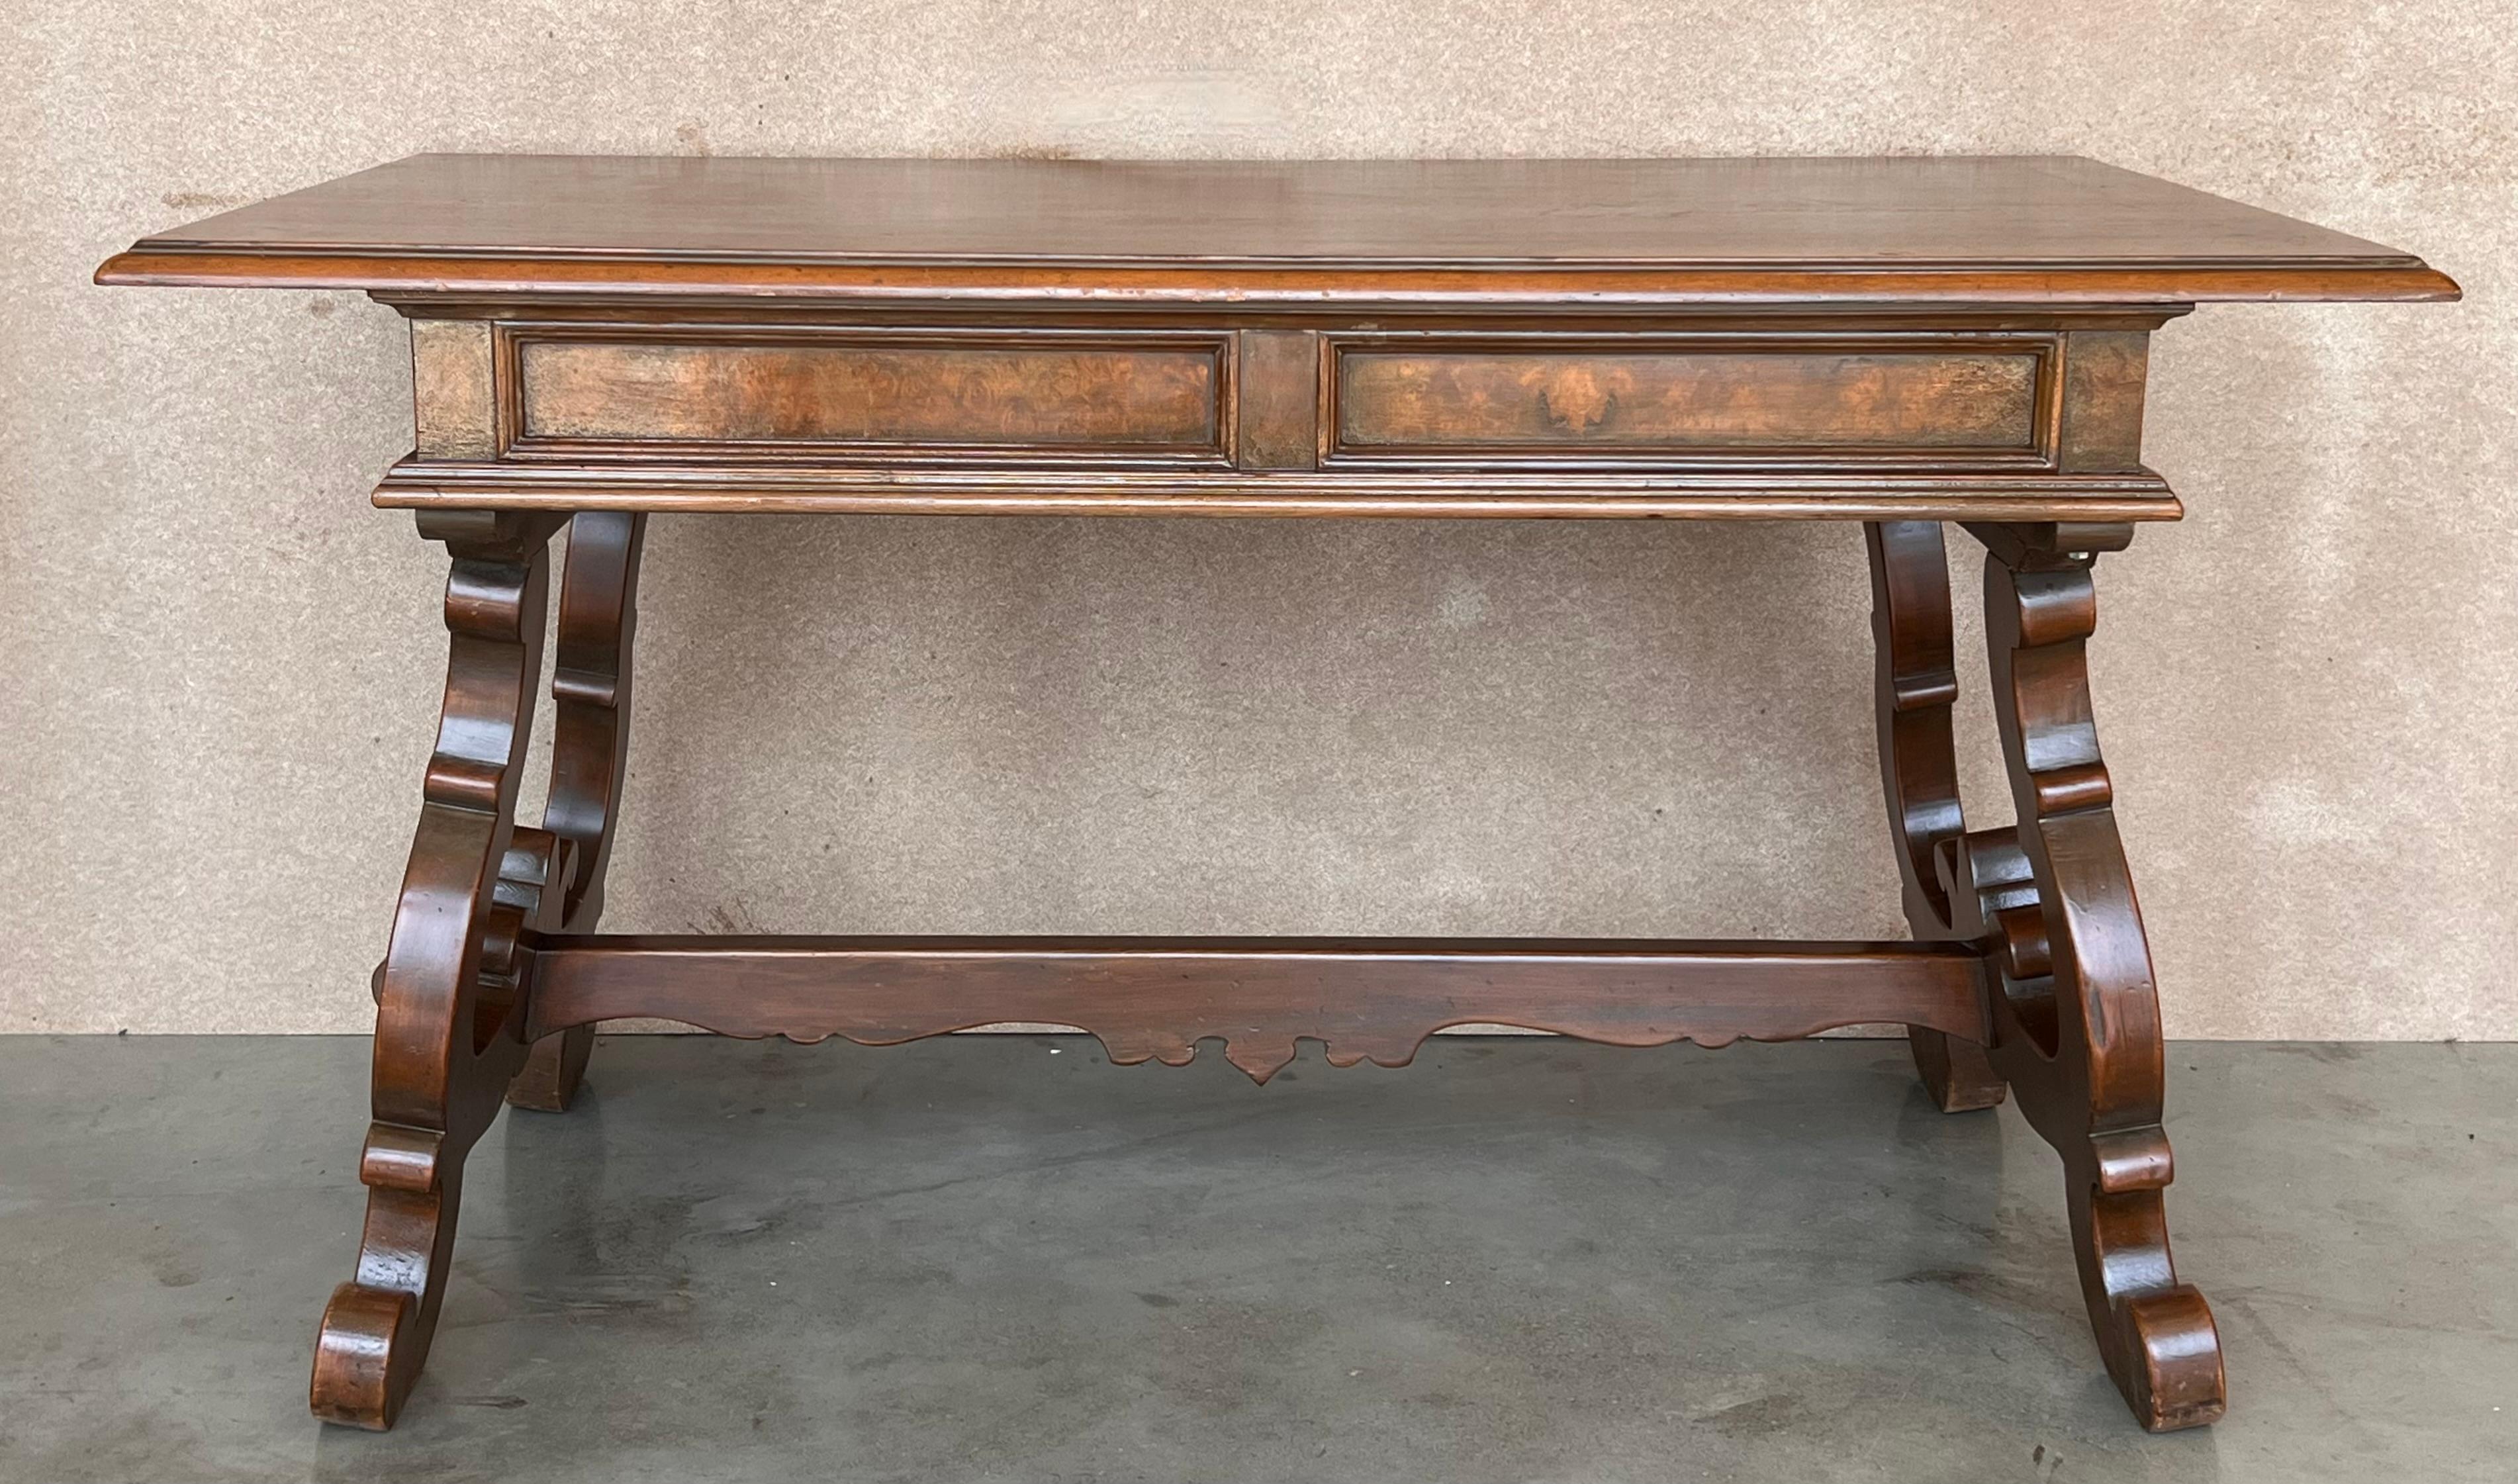 An 20th century Spanish baroque desk, or writing table made of solid walnut with lyre shaped legs joined by wood stretchers. Hand carved decoration across the front and the back. Two drawers with original iron drawer pulls. The top is made from a